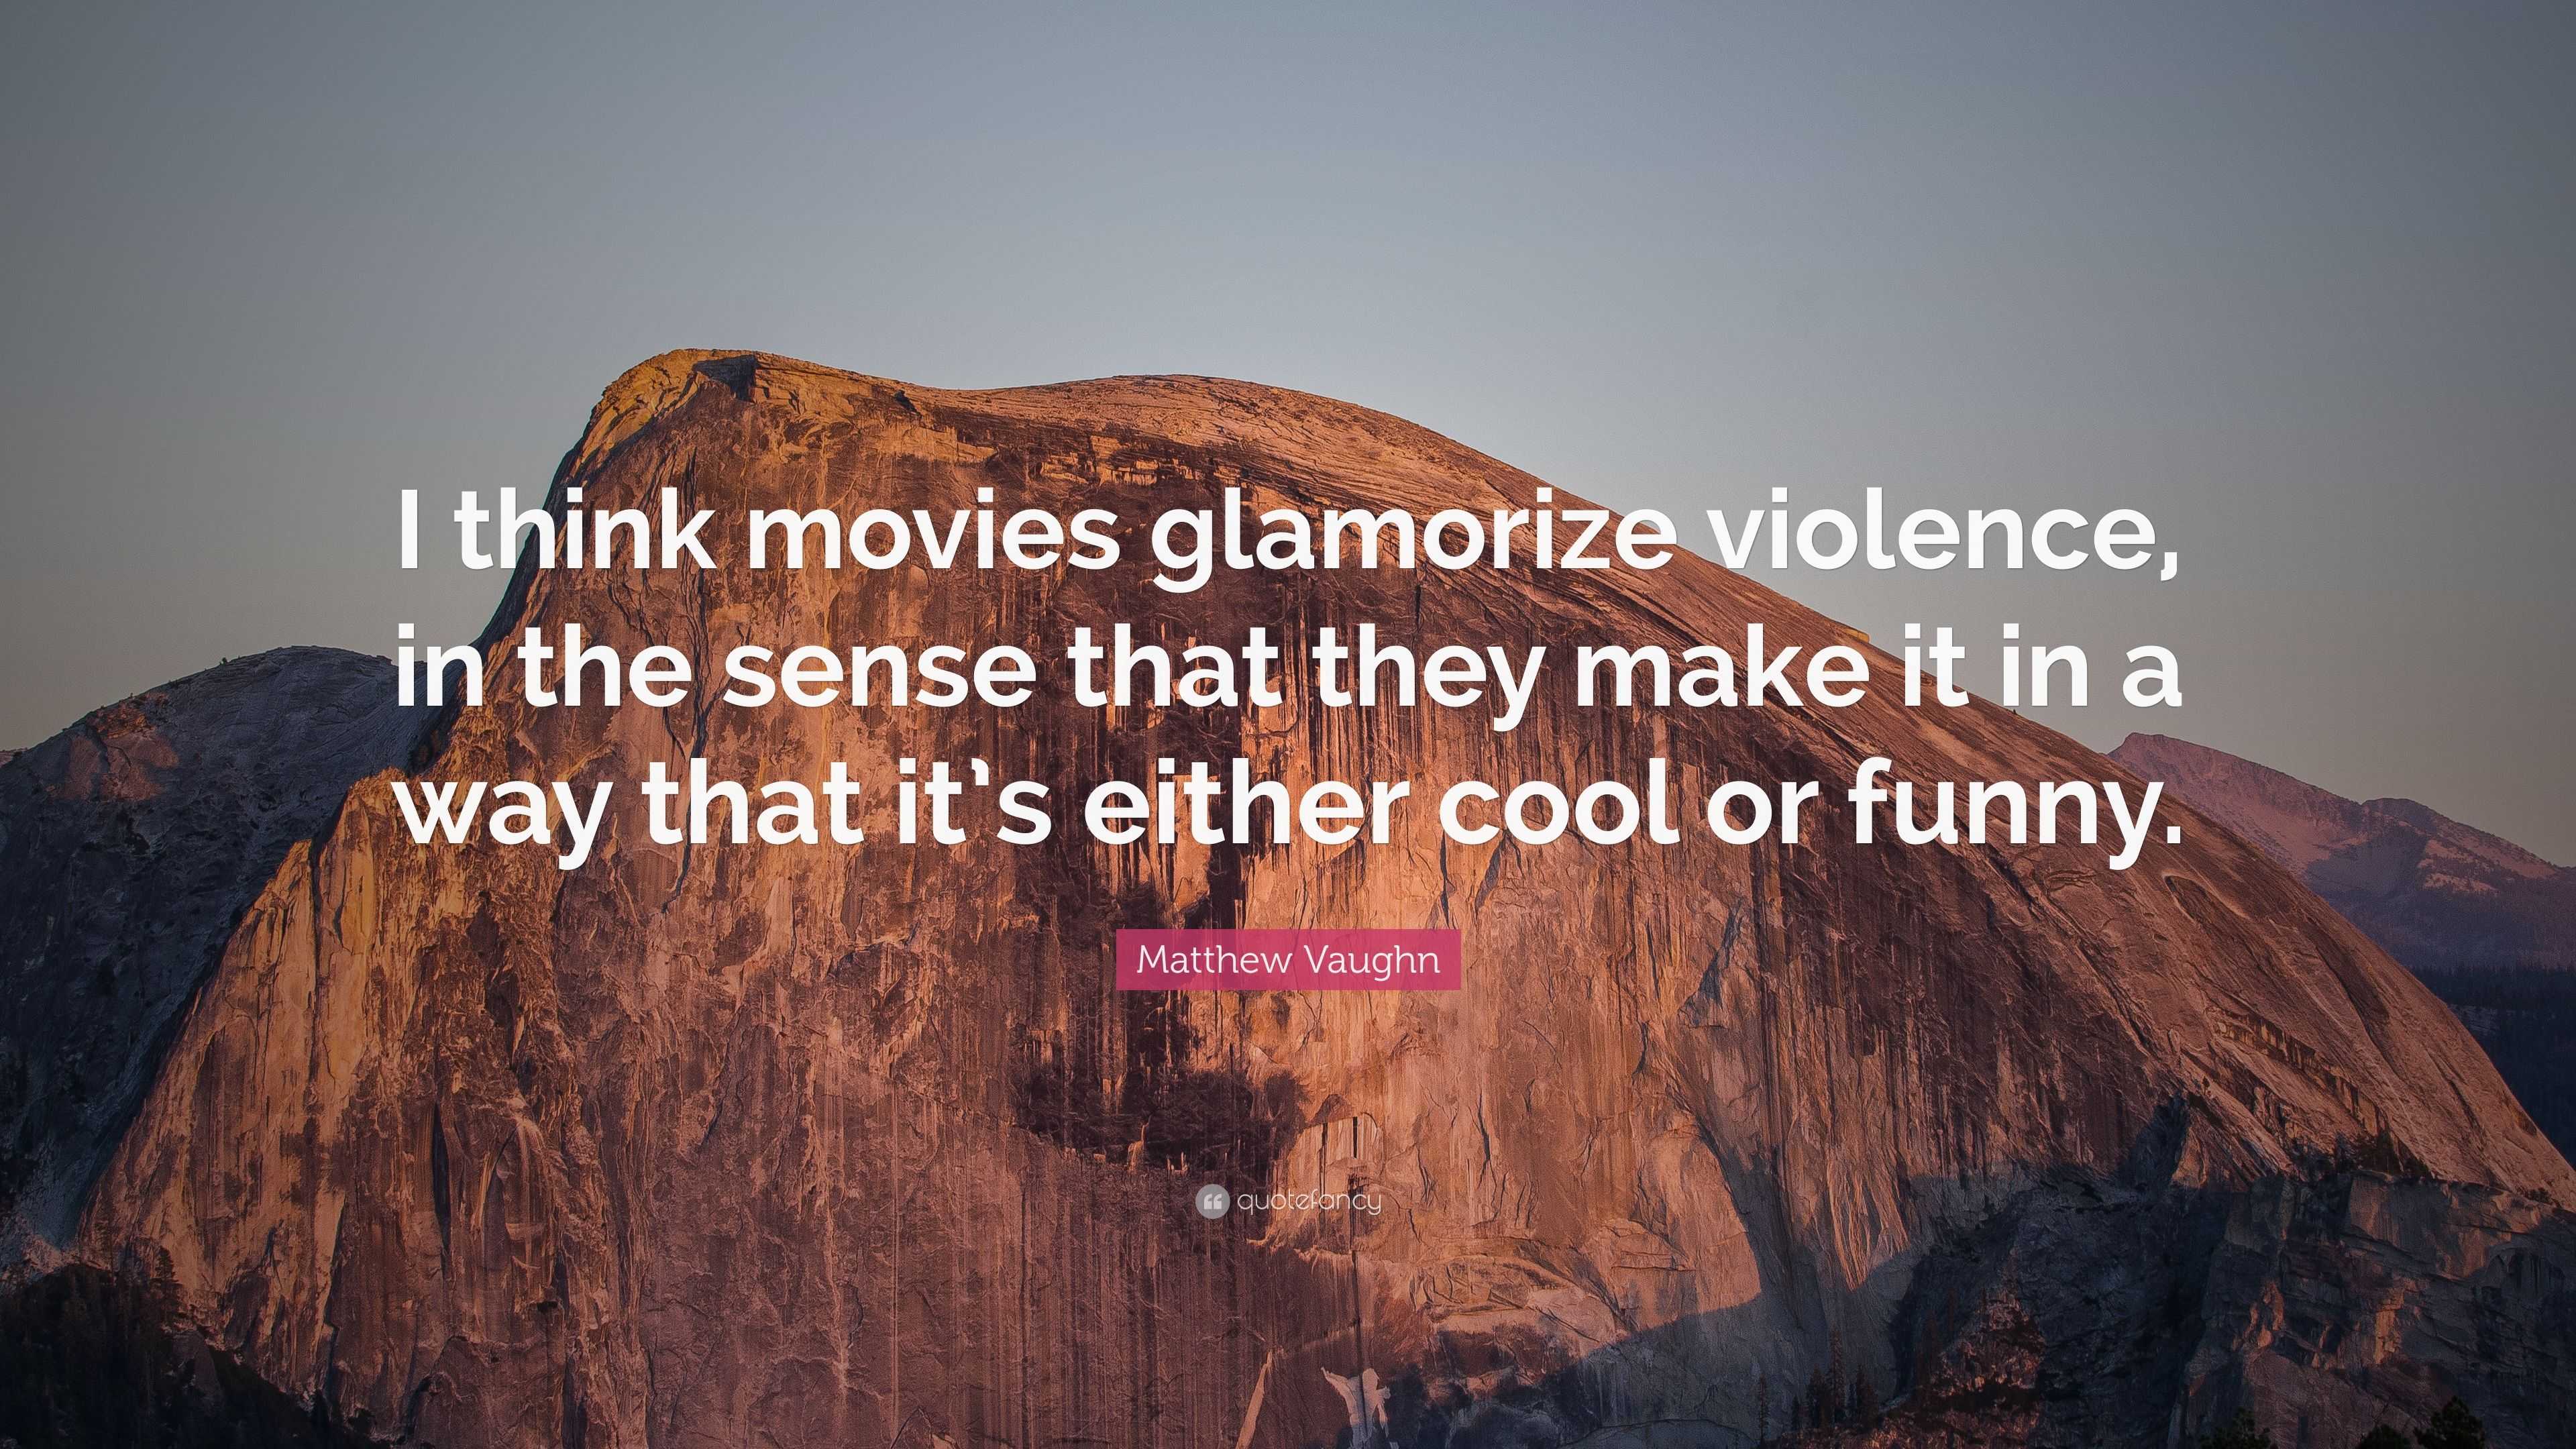 https://quotefancy.com/media/wallpaper/3840x2160/3334923-Matthew-Vaughn-Quote-I-think-movies-glamorize-violence-in-the.jpg